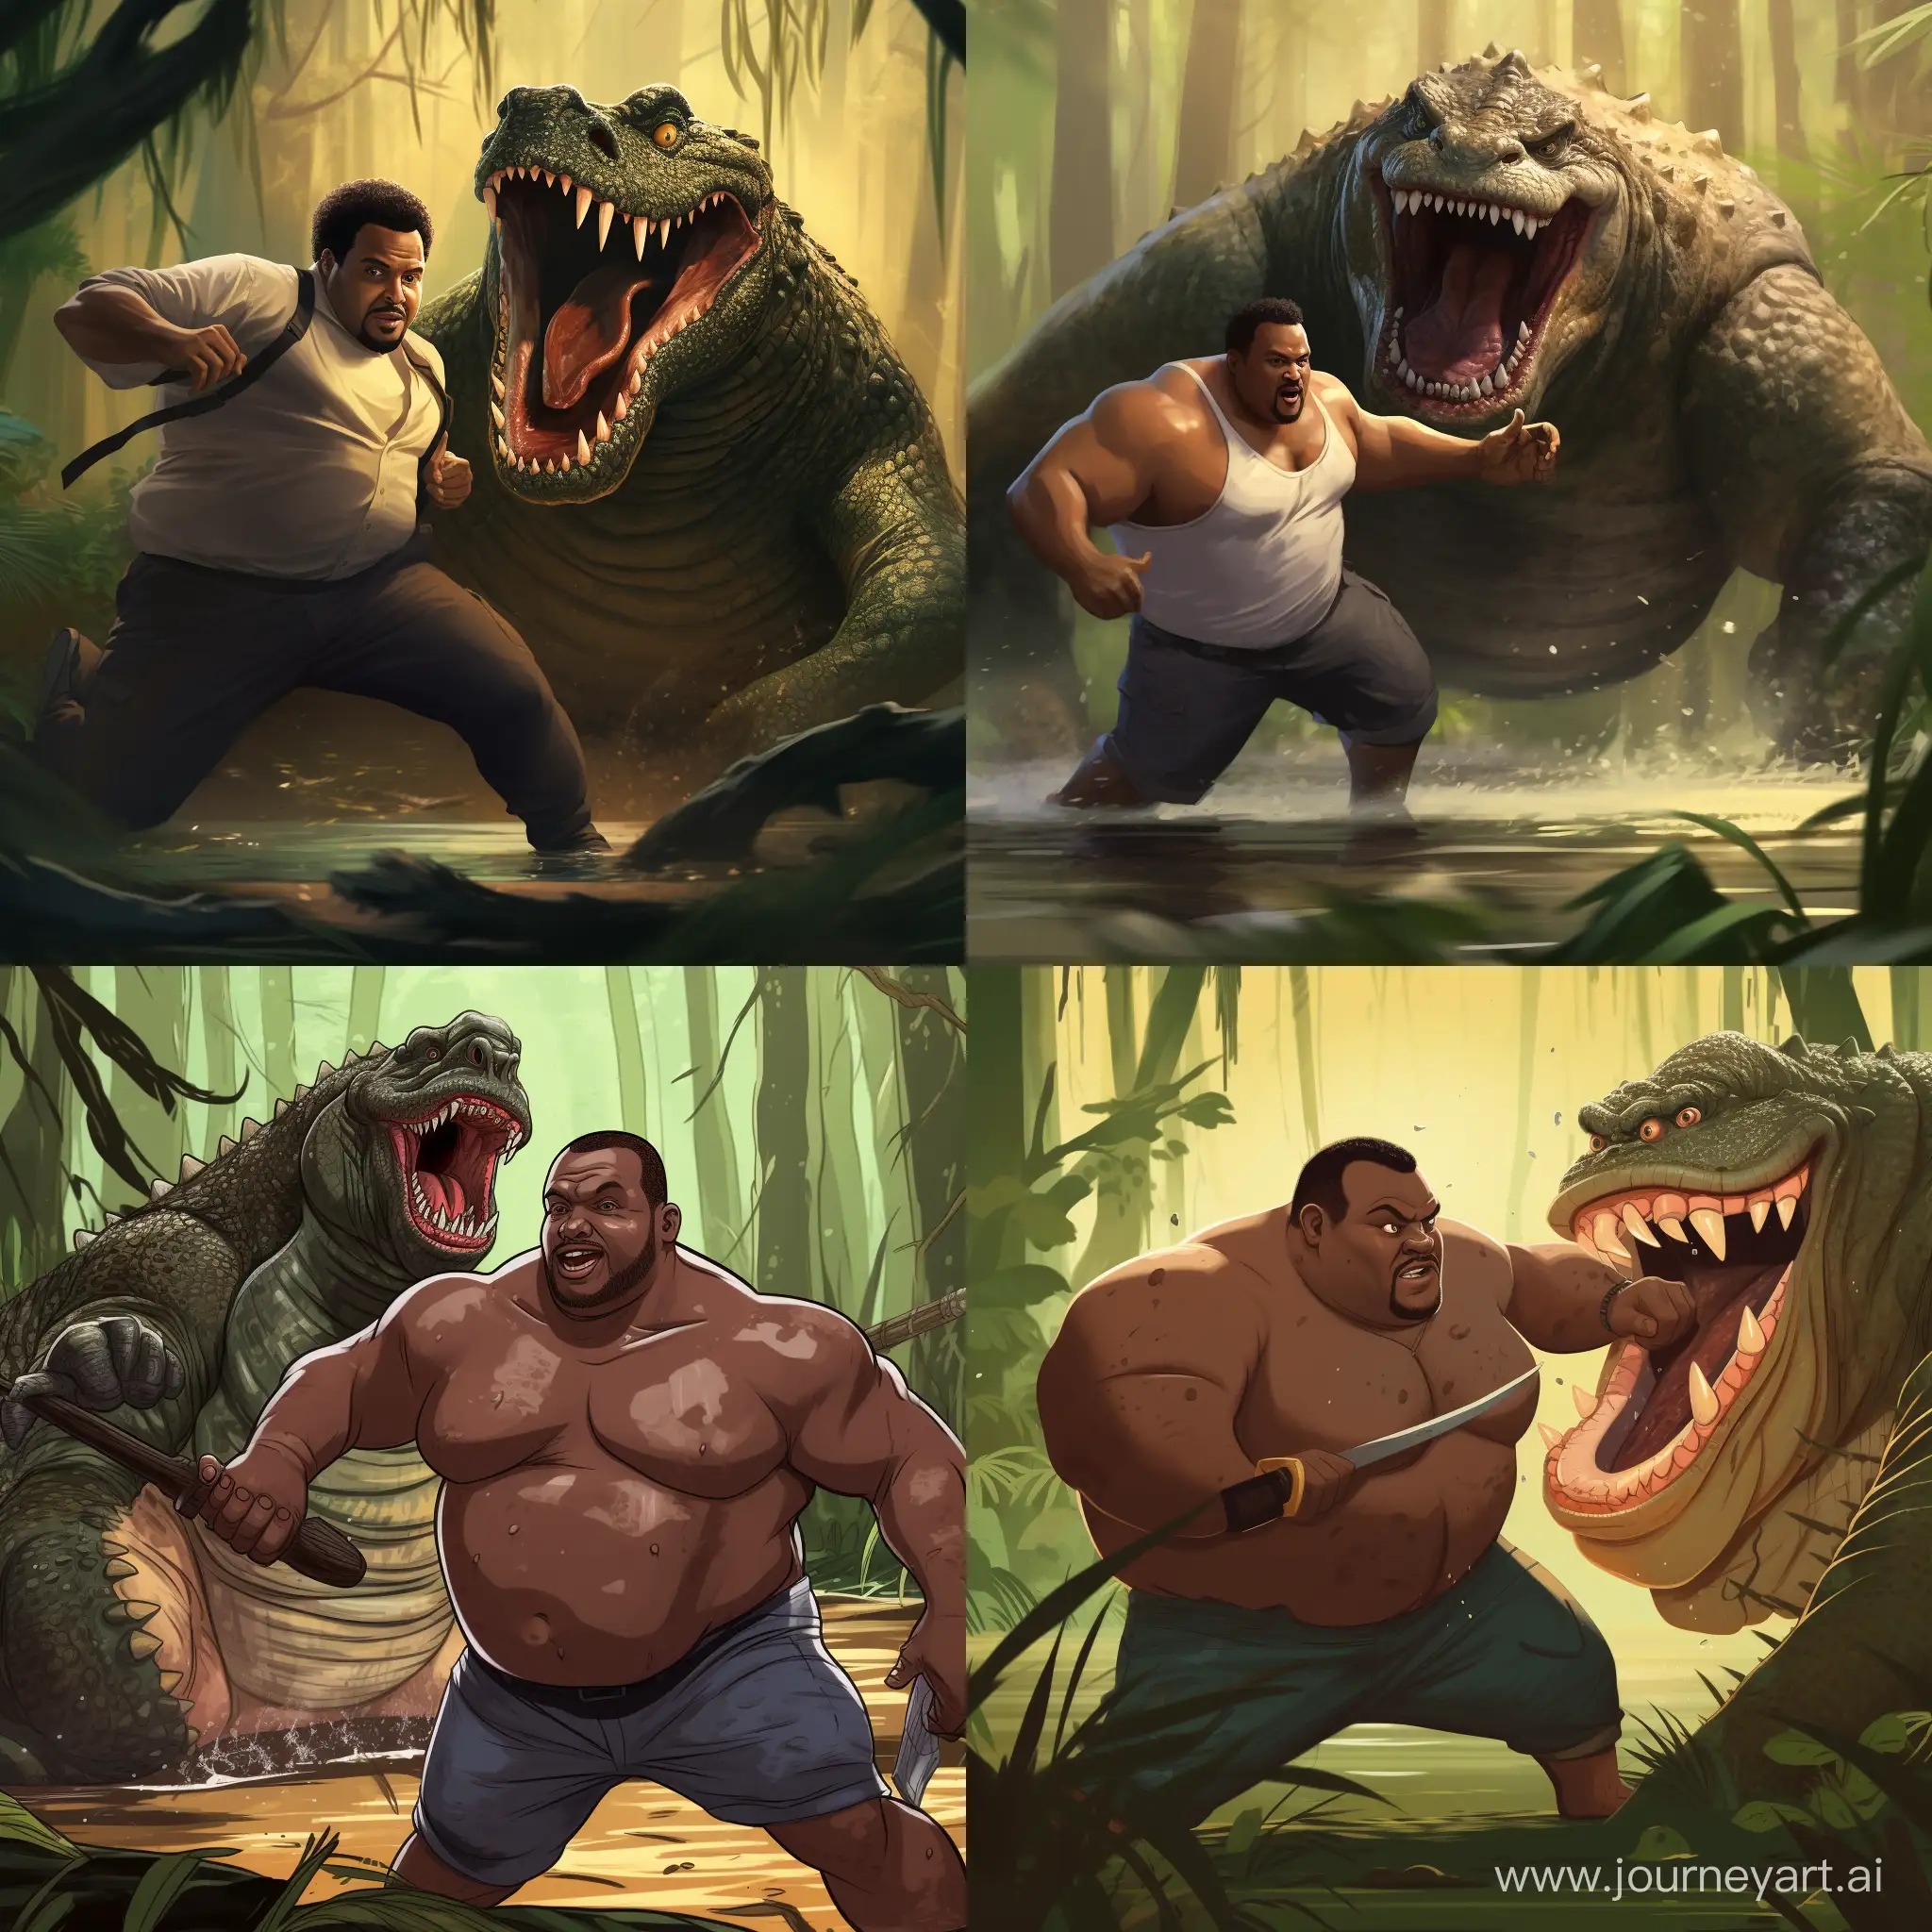 Brave-Encounter-Stout-Man-Wrestling-a-Crocodile-in-the-Swamp